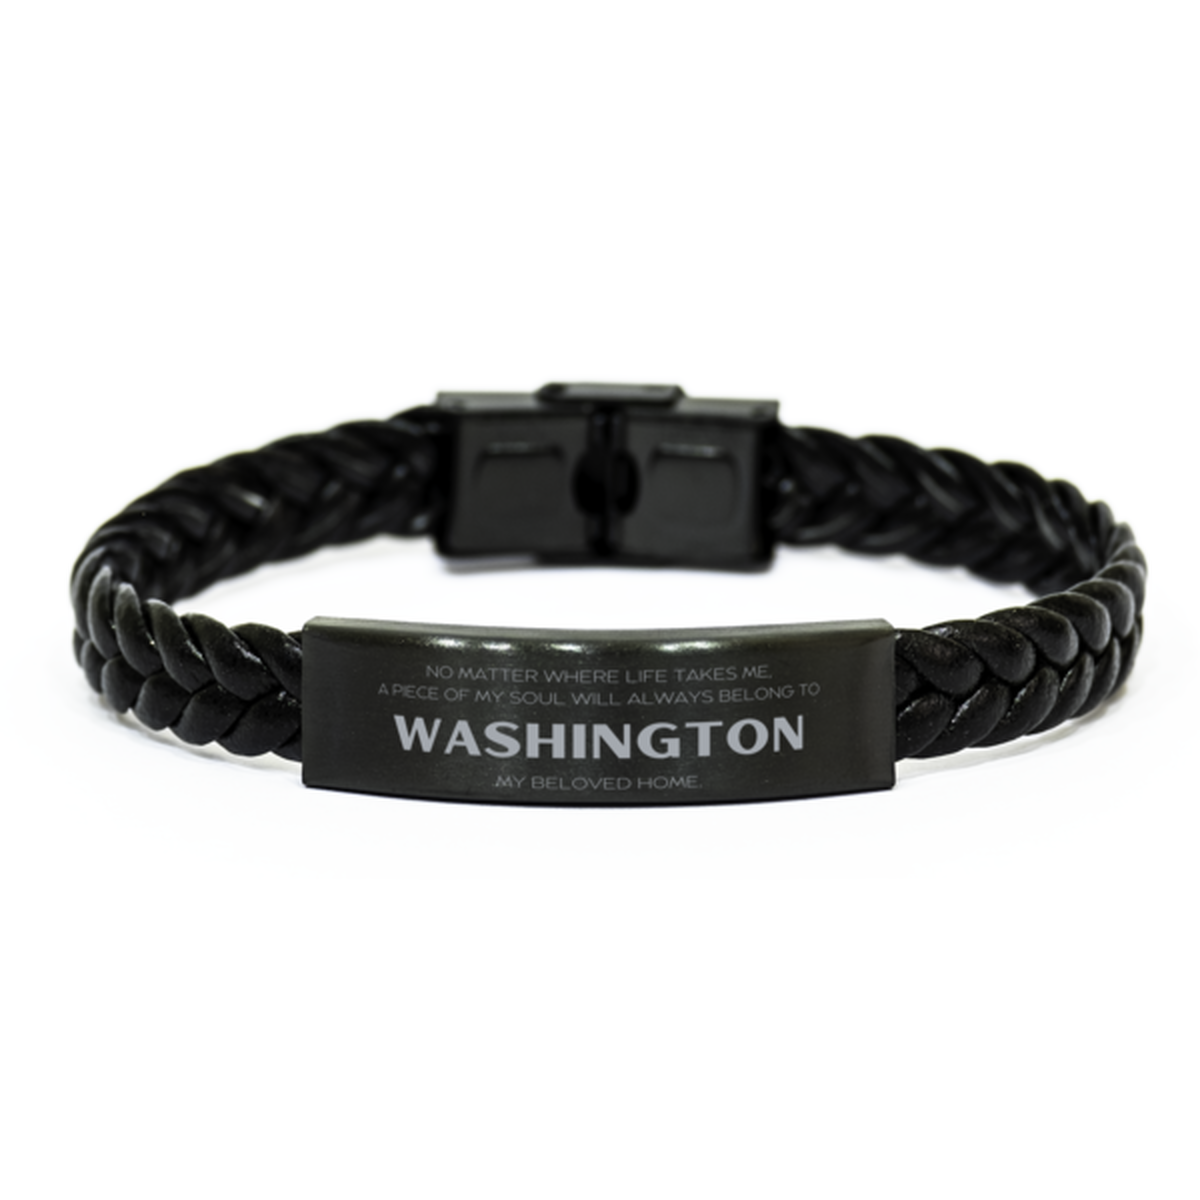 Love Washington State Gifts, My soul will always belong to Washington, Proud Braided Leather Bracelet, Birthday Unique Gifts For Washington Men, Women, Friends